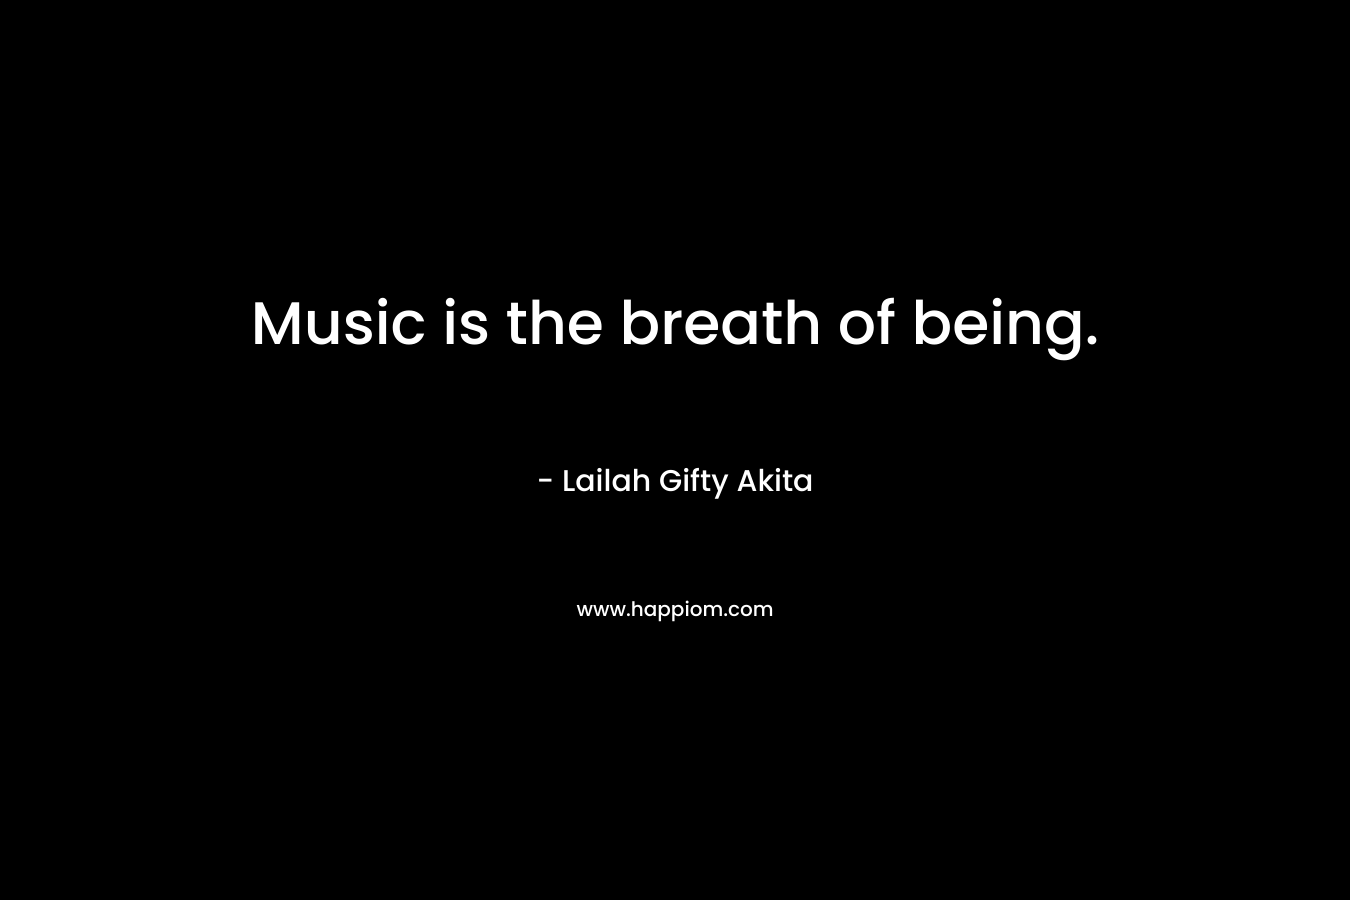 Music is the breath of being.